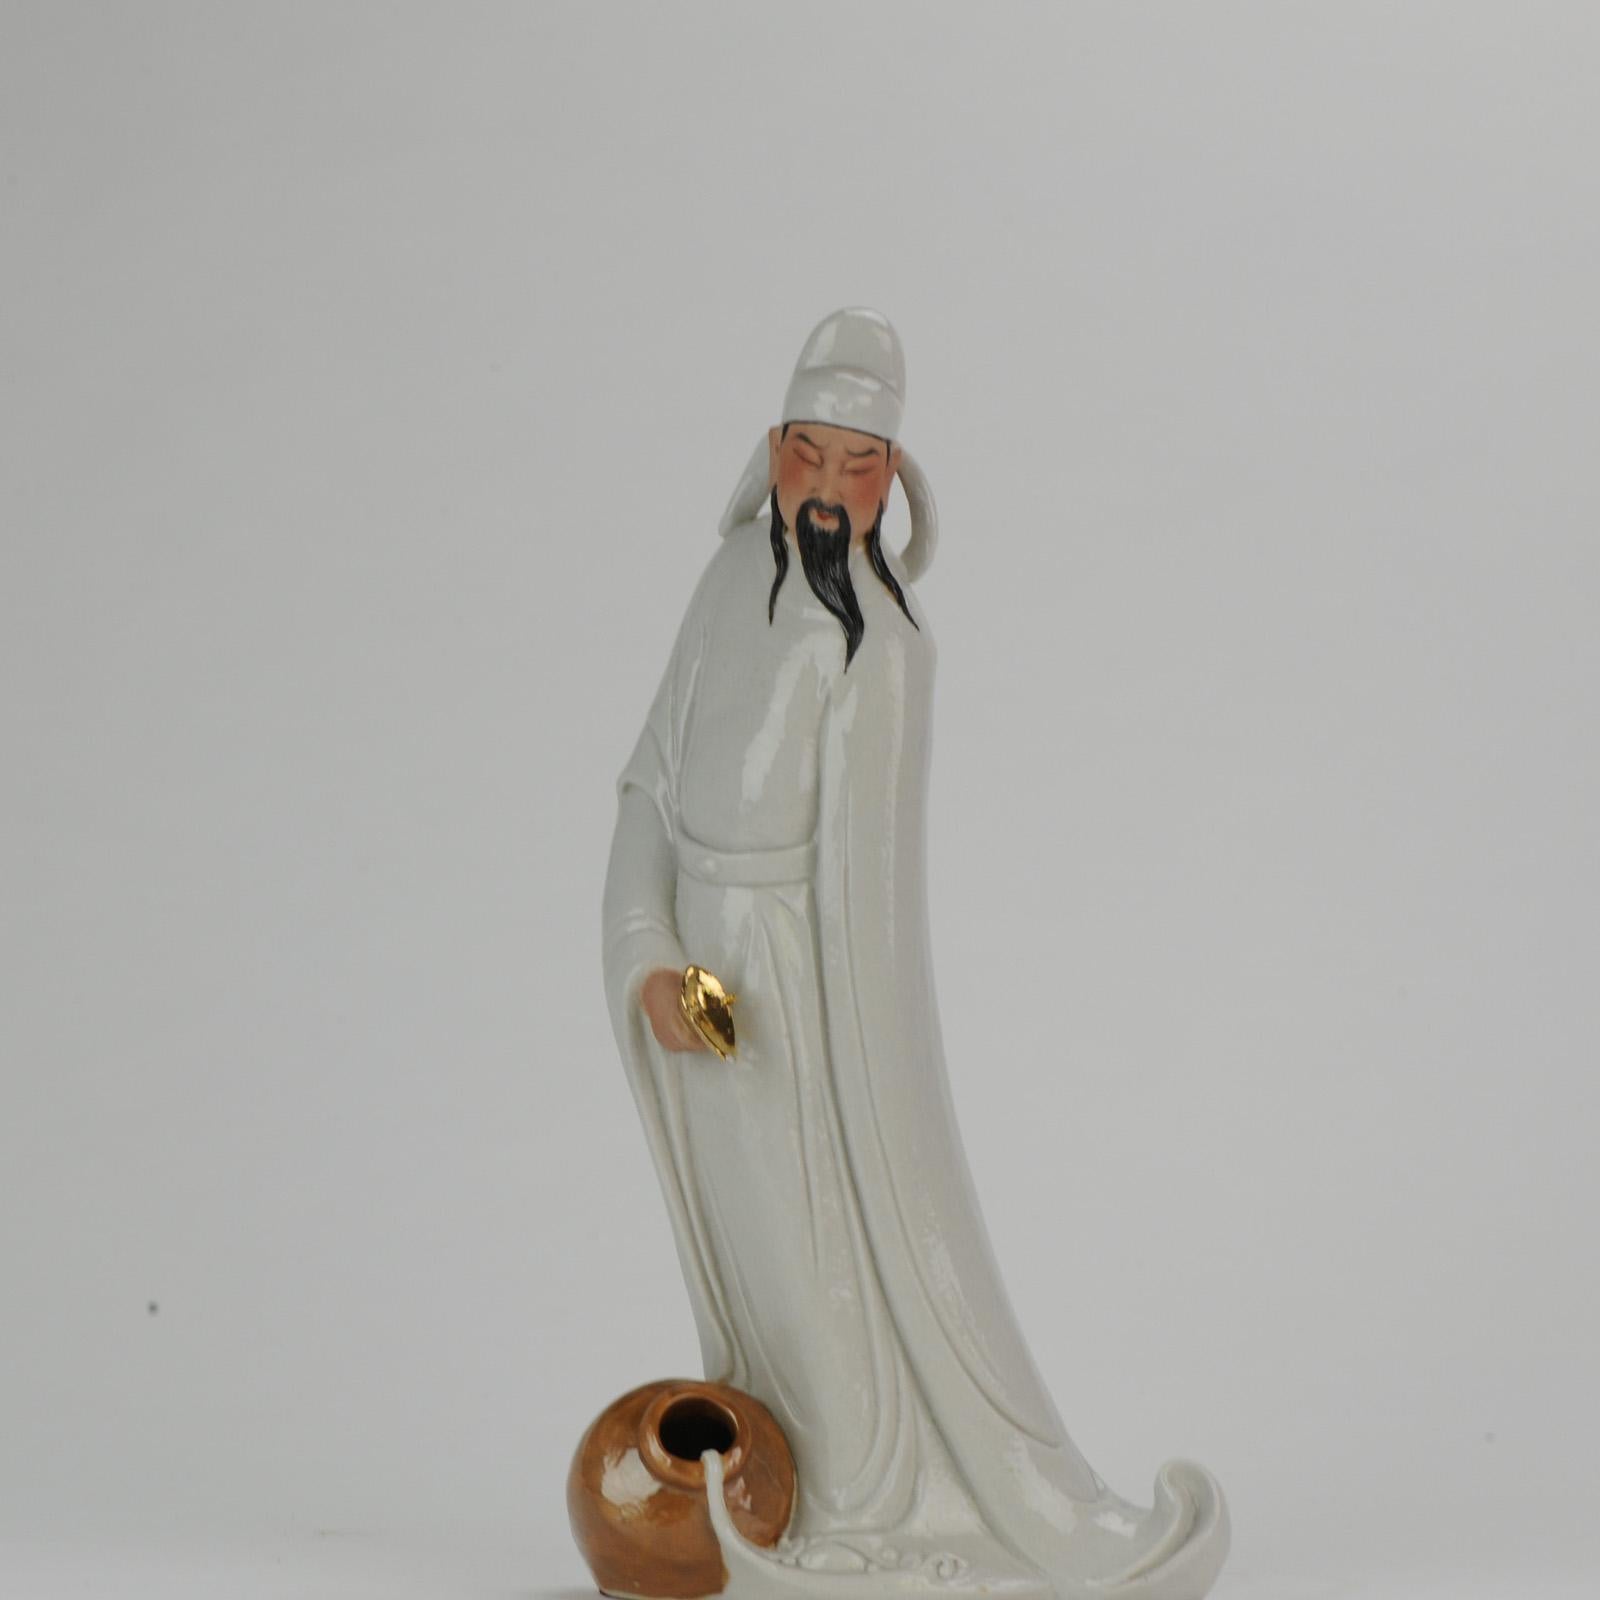 A polychrome porcelain sculpture of a man holding a small ritual vessel. Dated 1998. Created by Wang Qiang Biao (1970). Marked with seal stamps. China. With certificate.

Provenance: bought in Hong Kong, 1999.

7-5-19-24-19

Condition
Overall